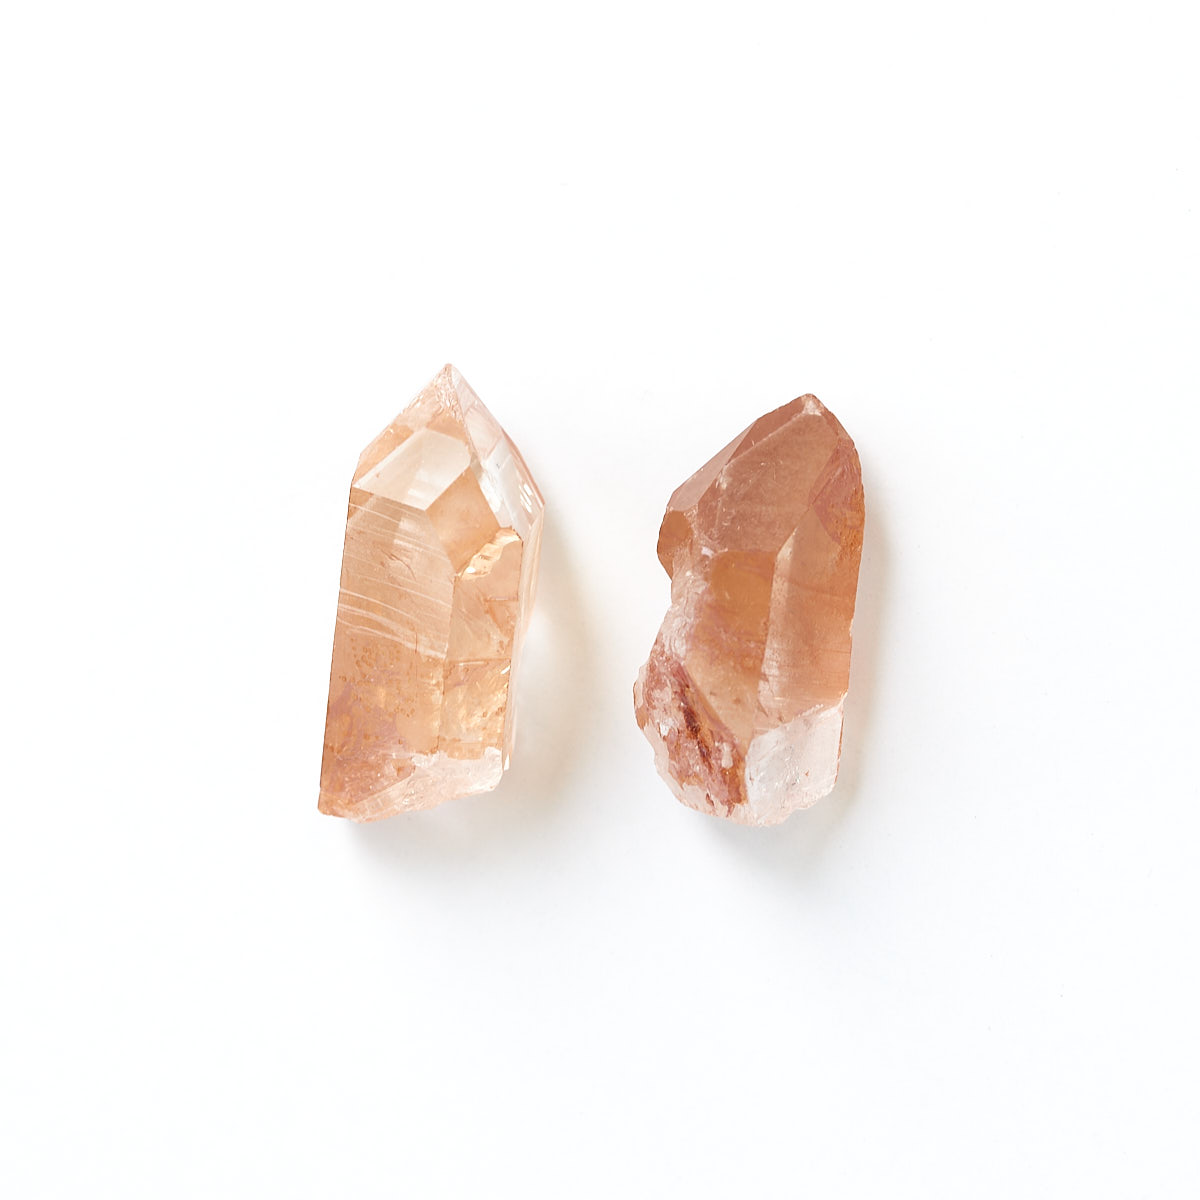 NATURAL Tangerine orange quartz small crystal point cluster Crystals The orange color is naturally caused by hematite Very HEALING!